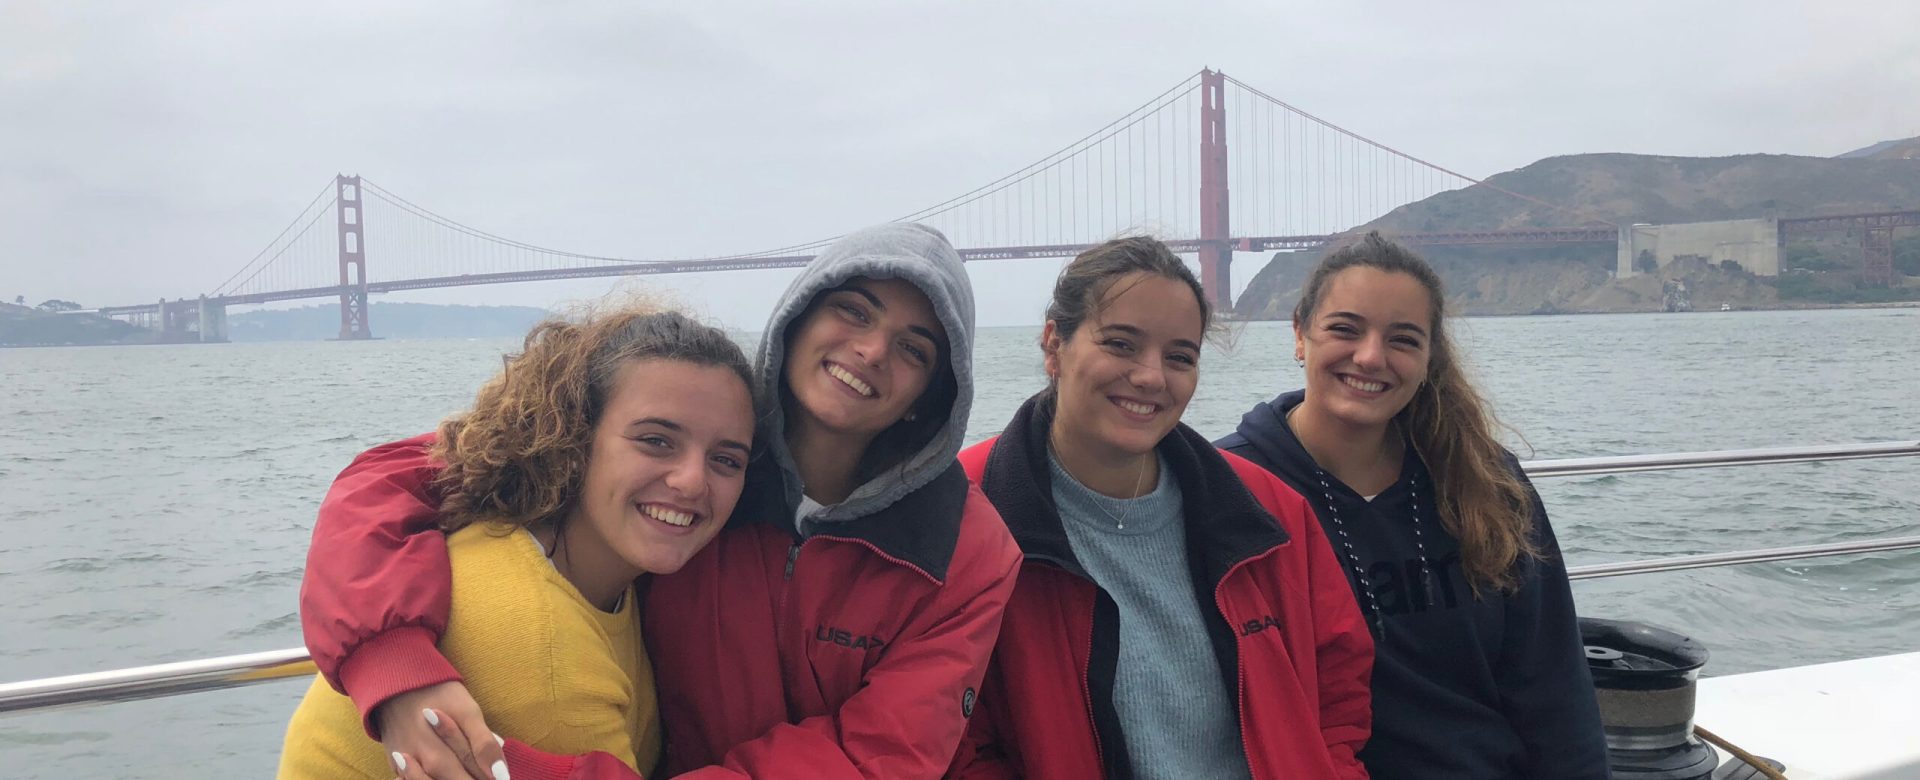 2018-08 Sailing AC in S.Francisco - 208